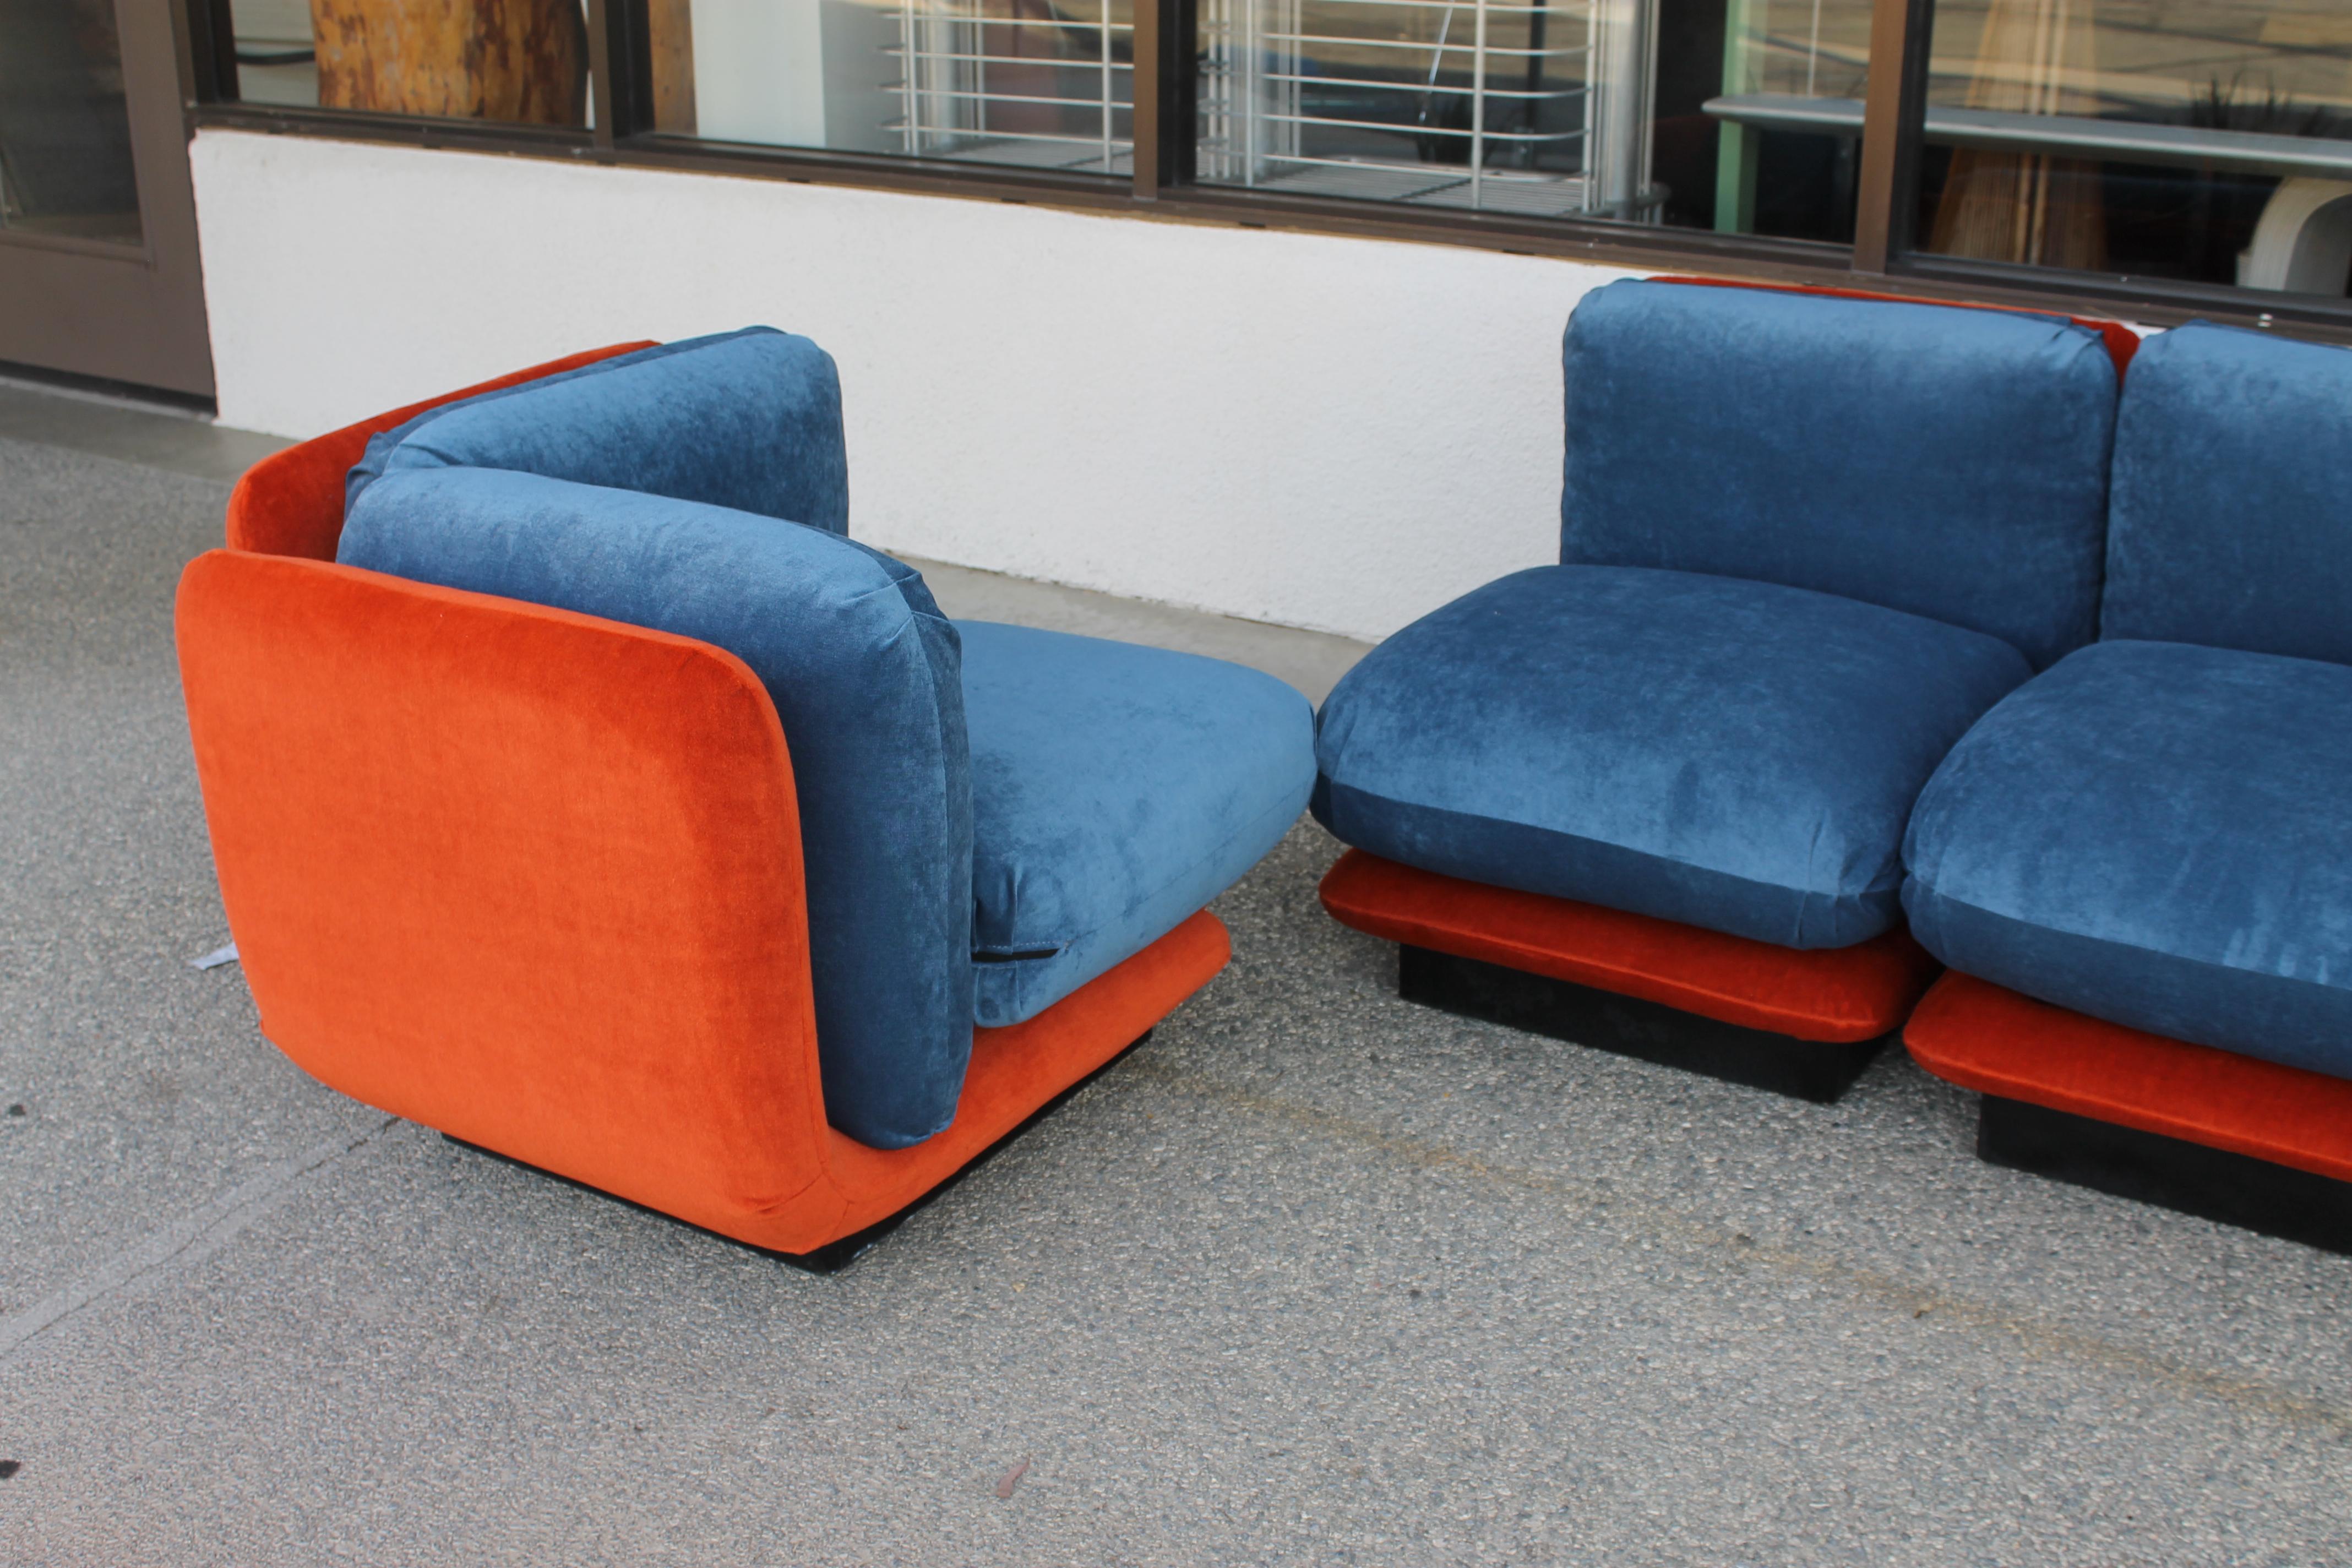 Late 20th Century Sectional Couch with Orange and Blue Mohair